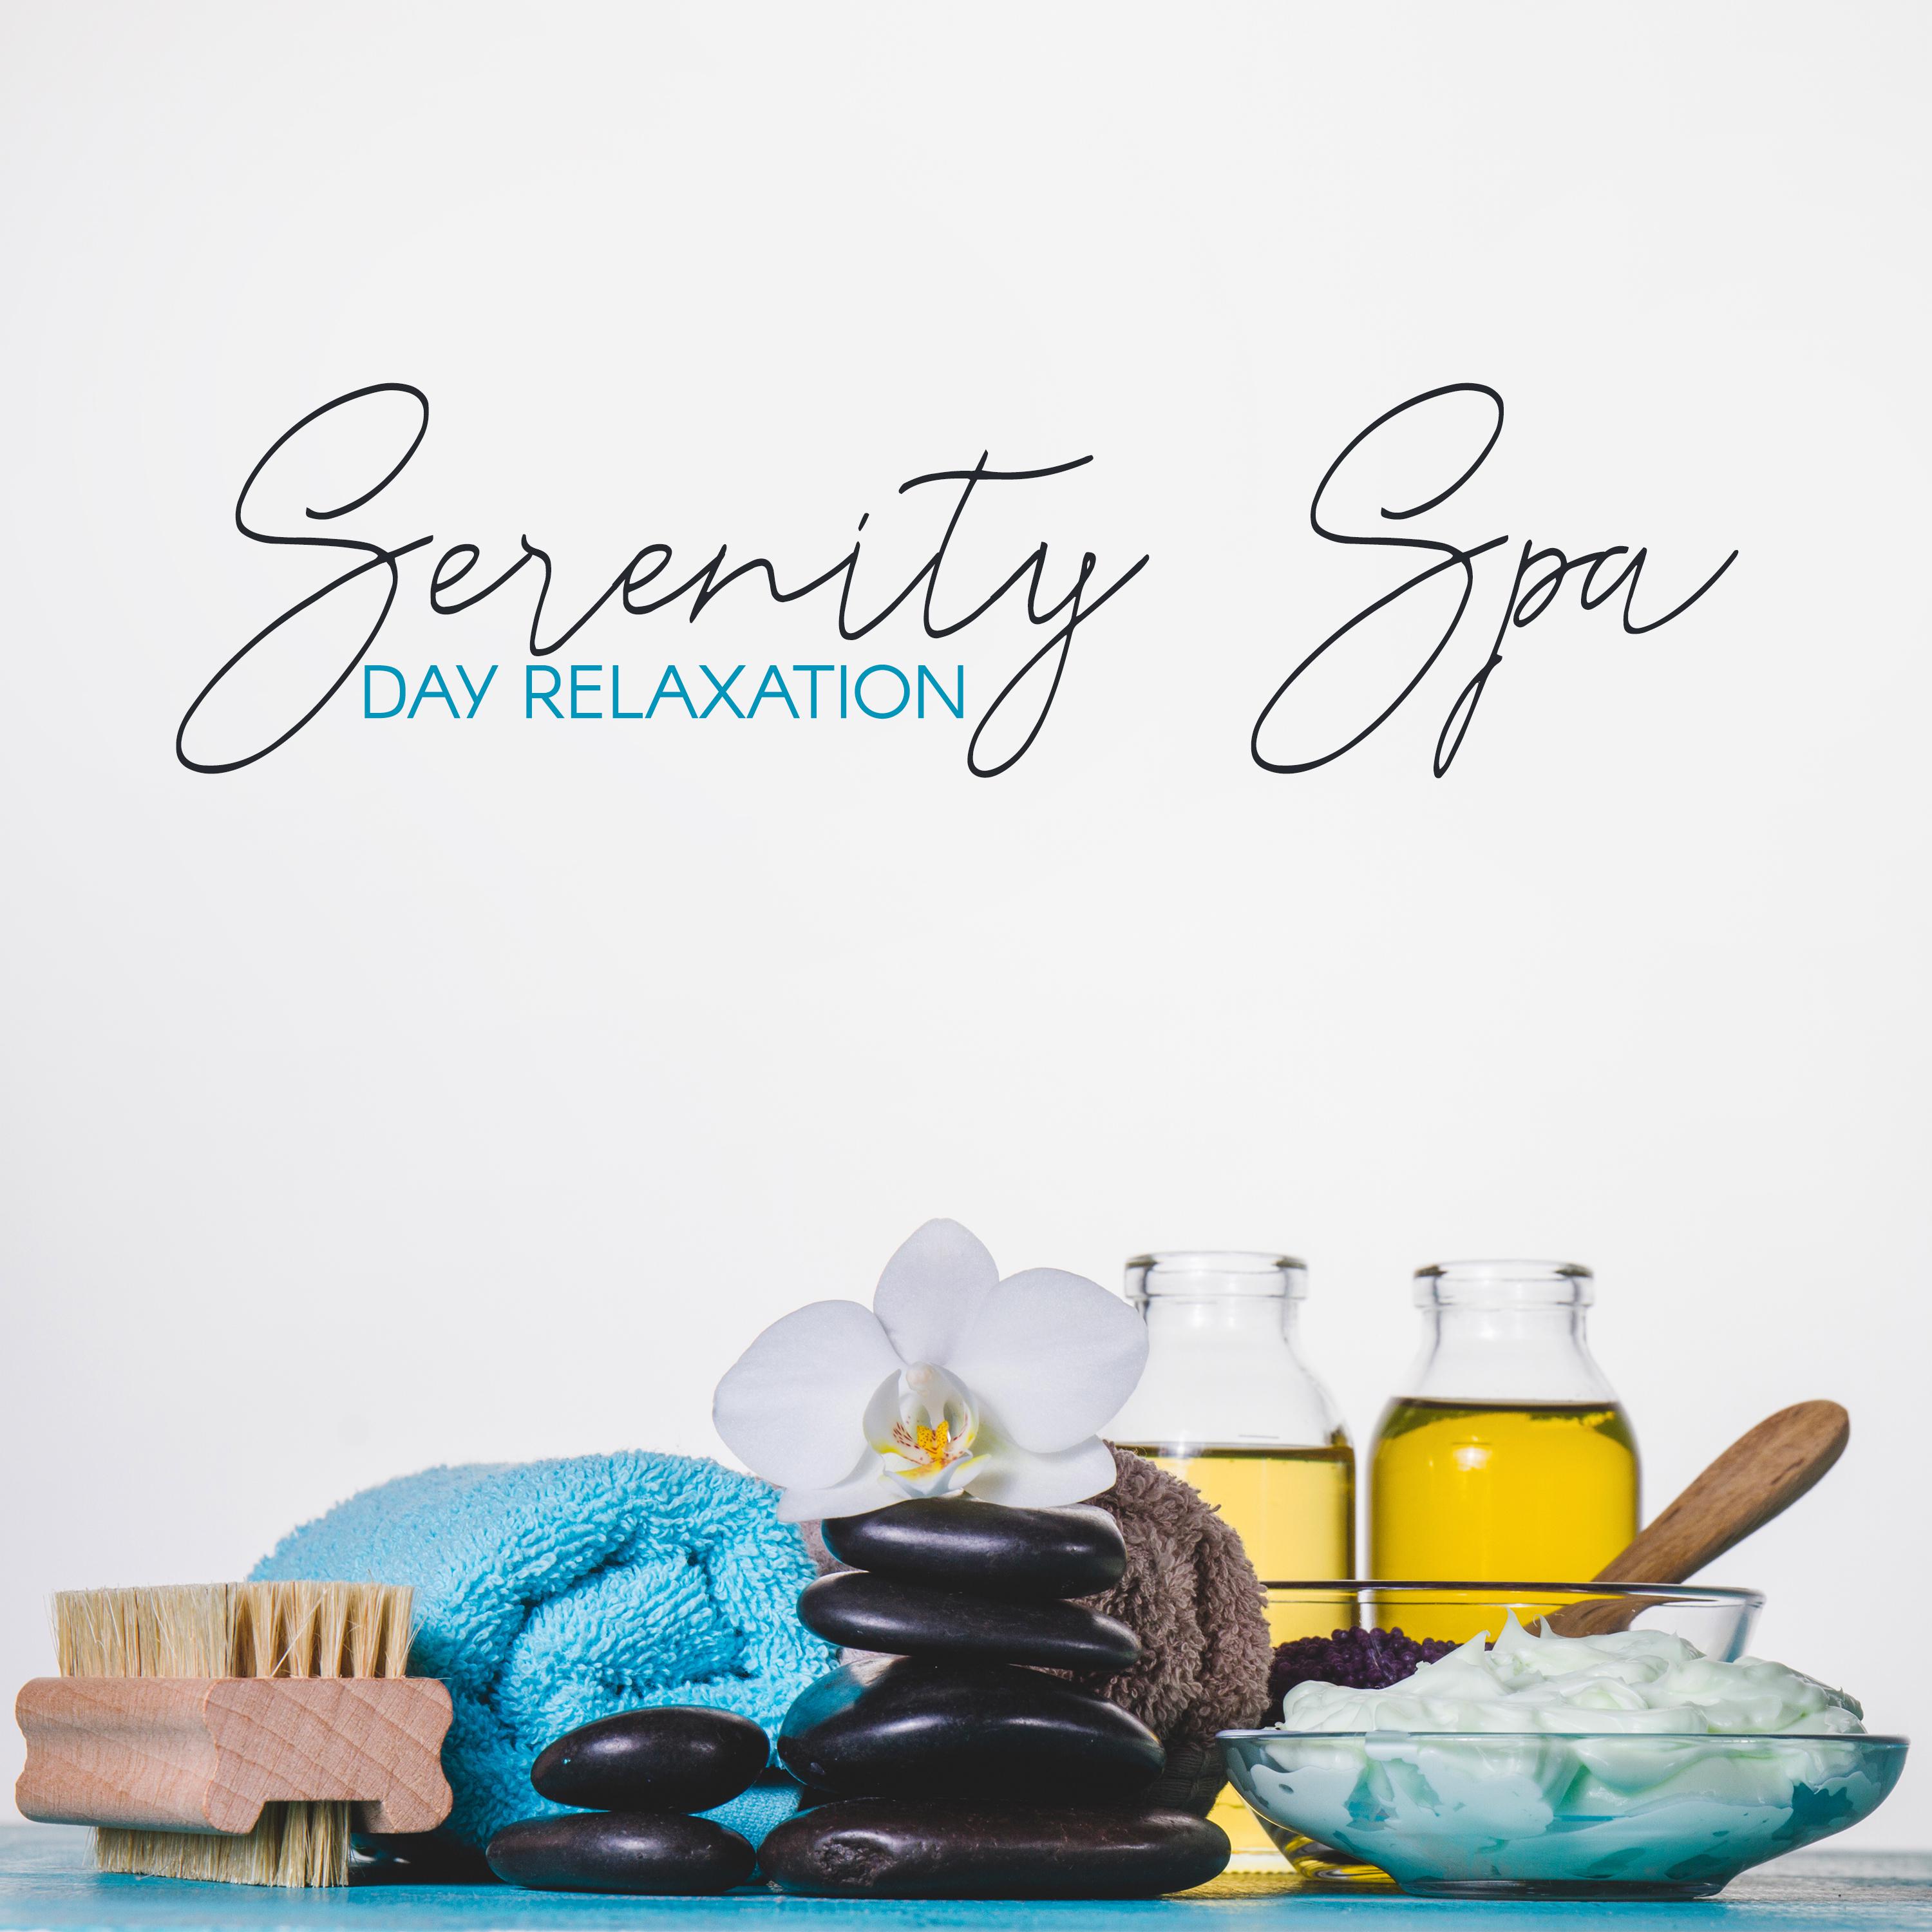 Serenity Spa Day Relaxation (Summer Holiday Wellness & Massage, Delicate Sounds, Spa Perfect Time)